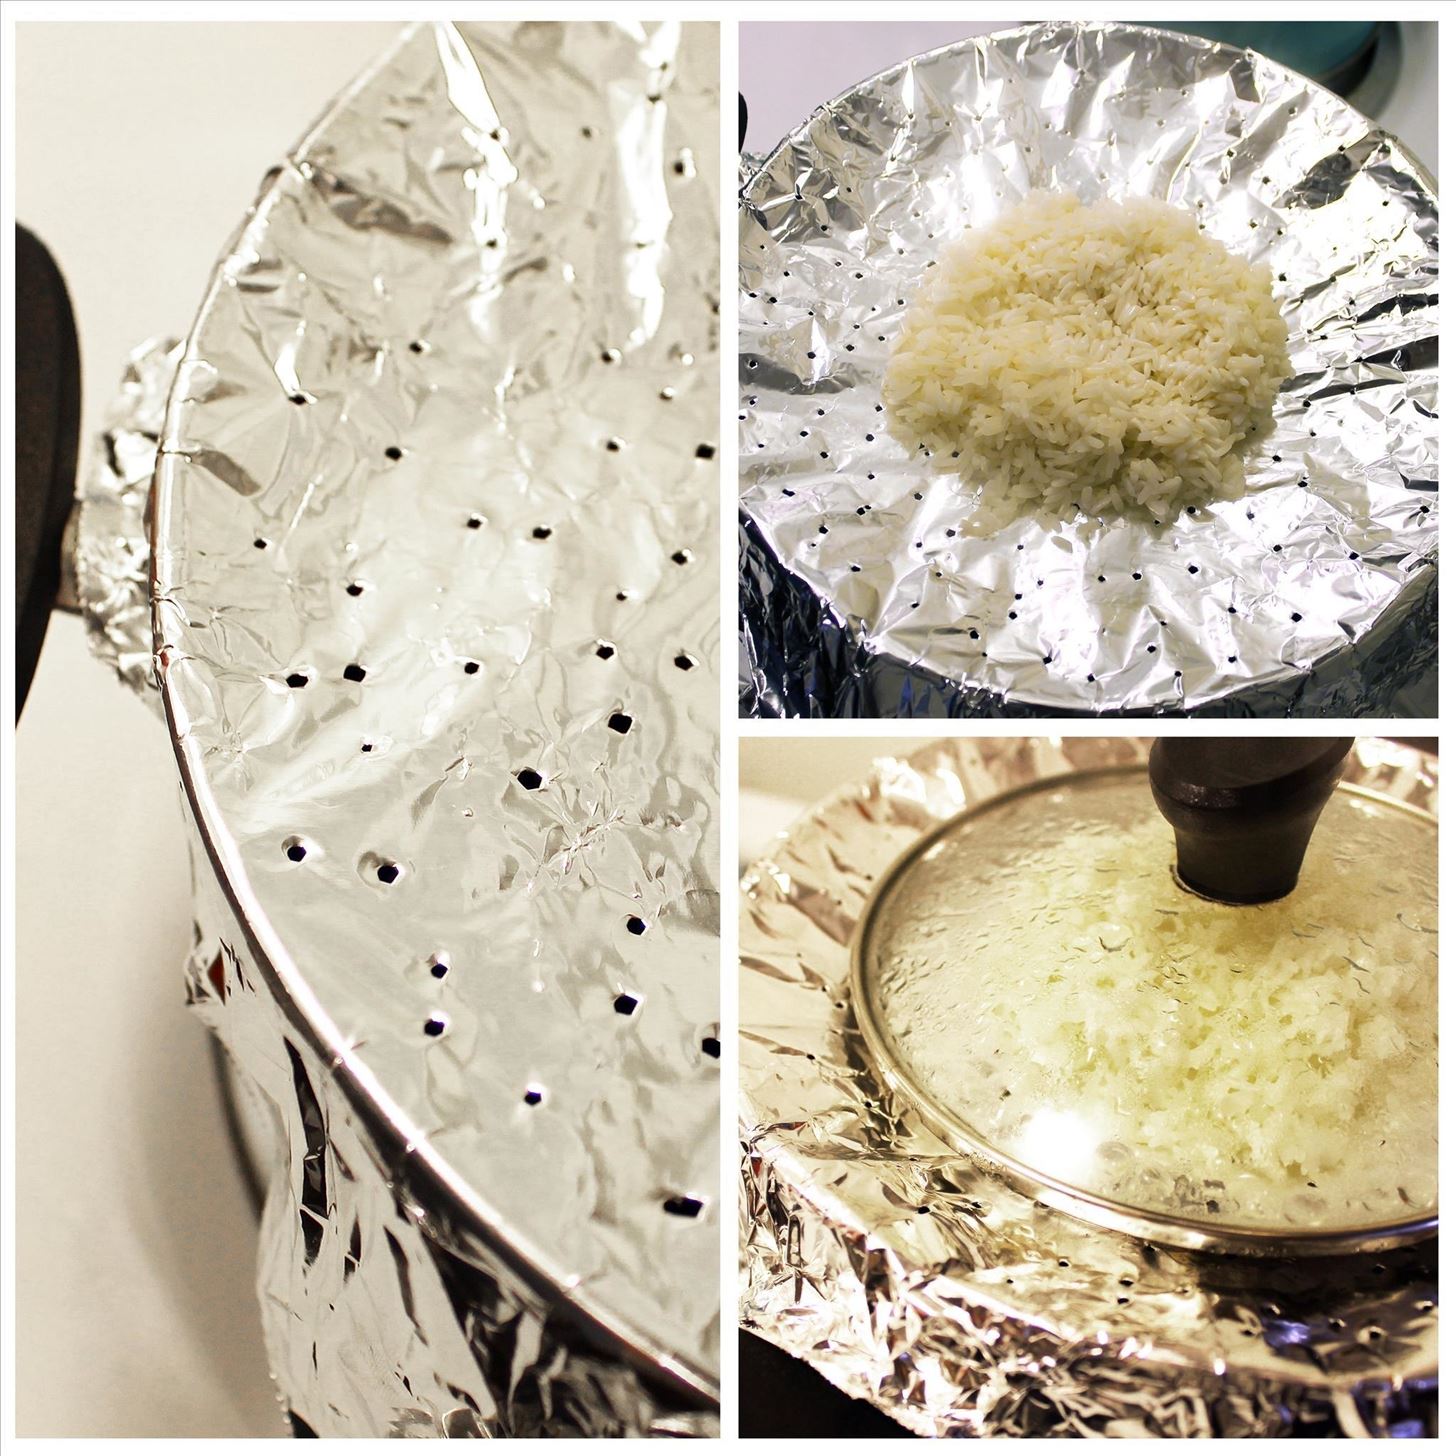 How to Make Delicious Thai Sticky Rice Without a Steamer or Rice Cooker